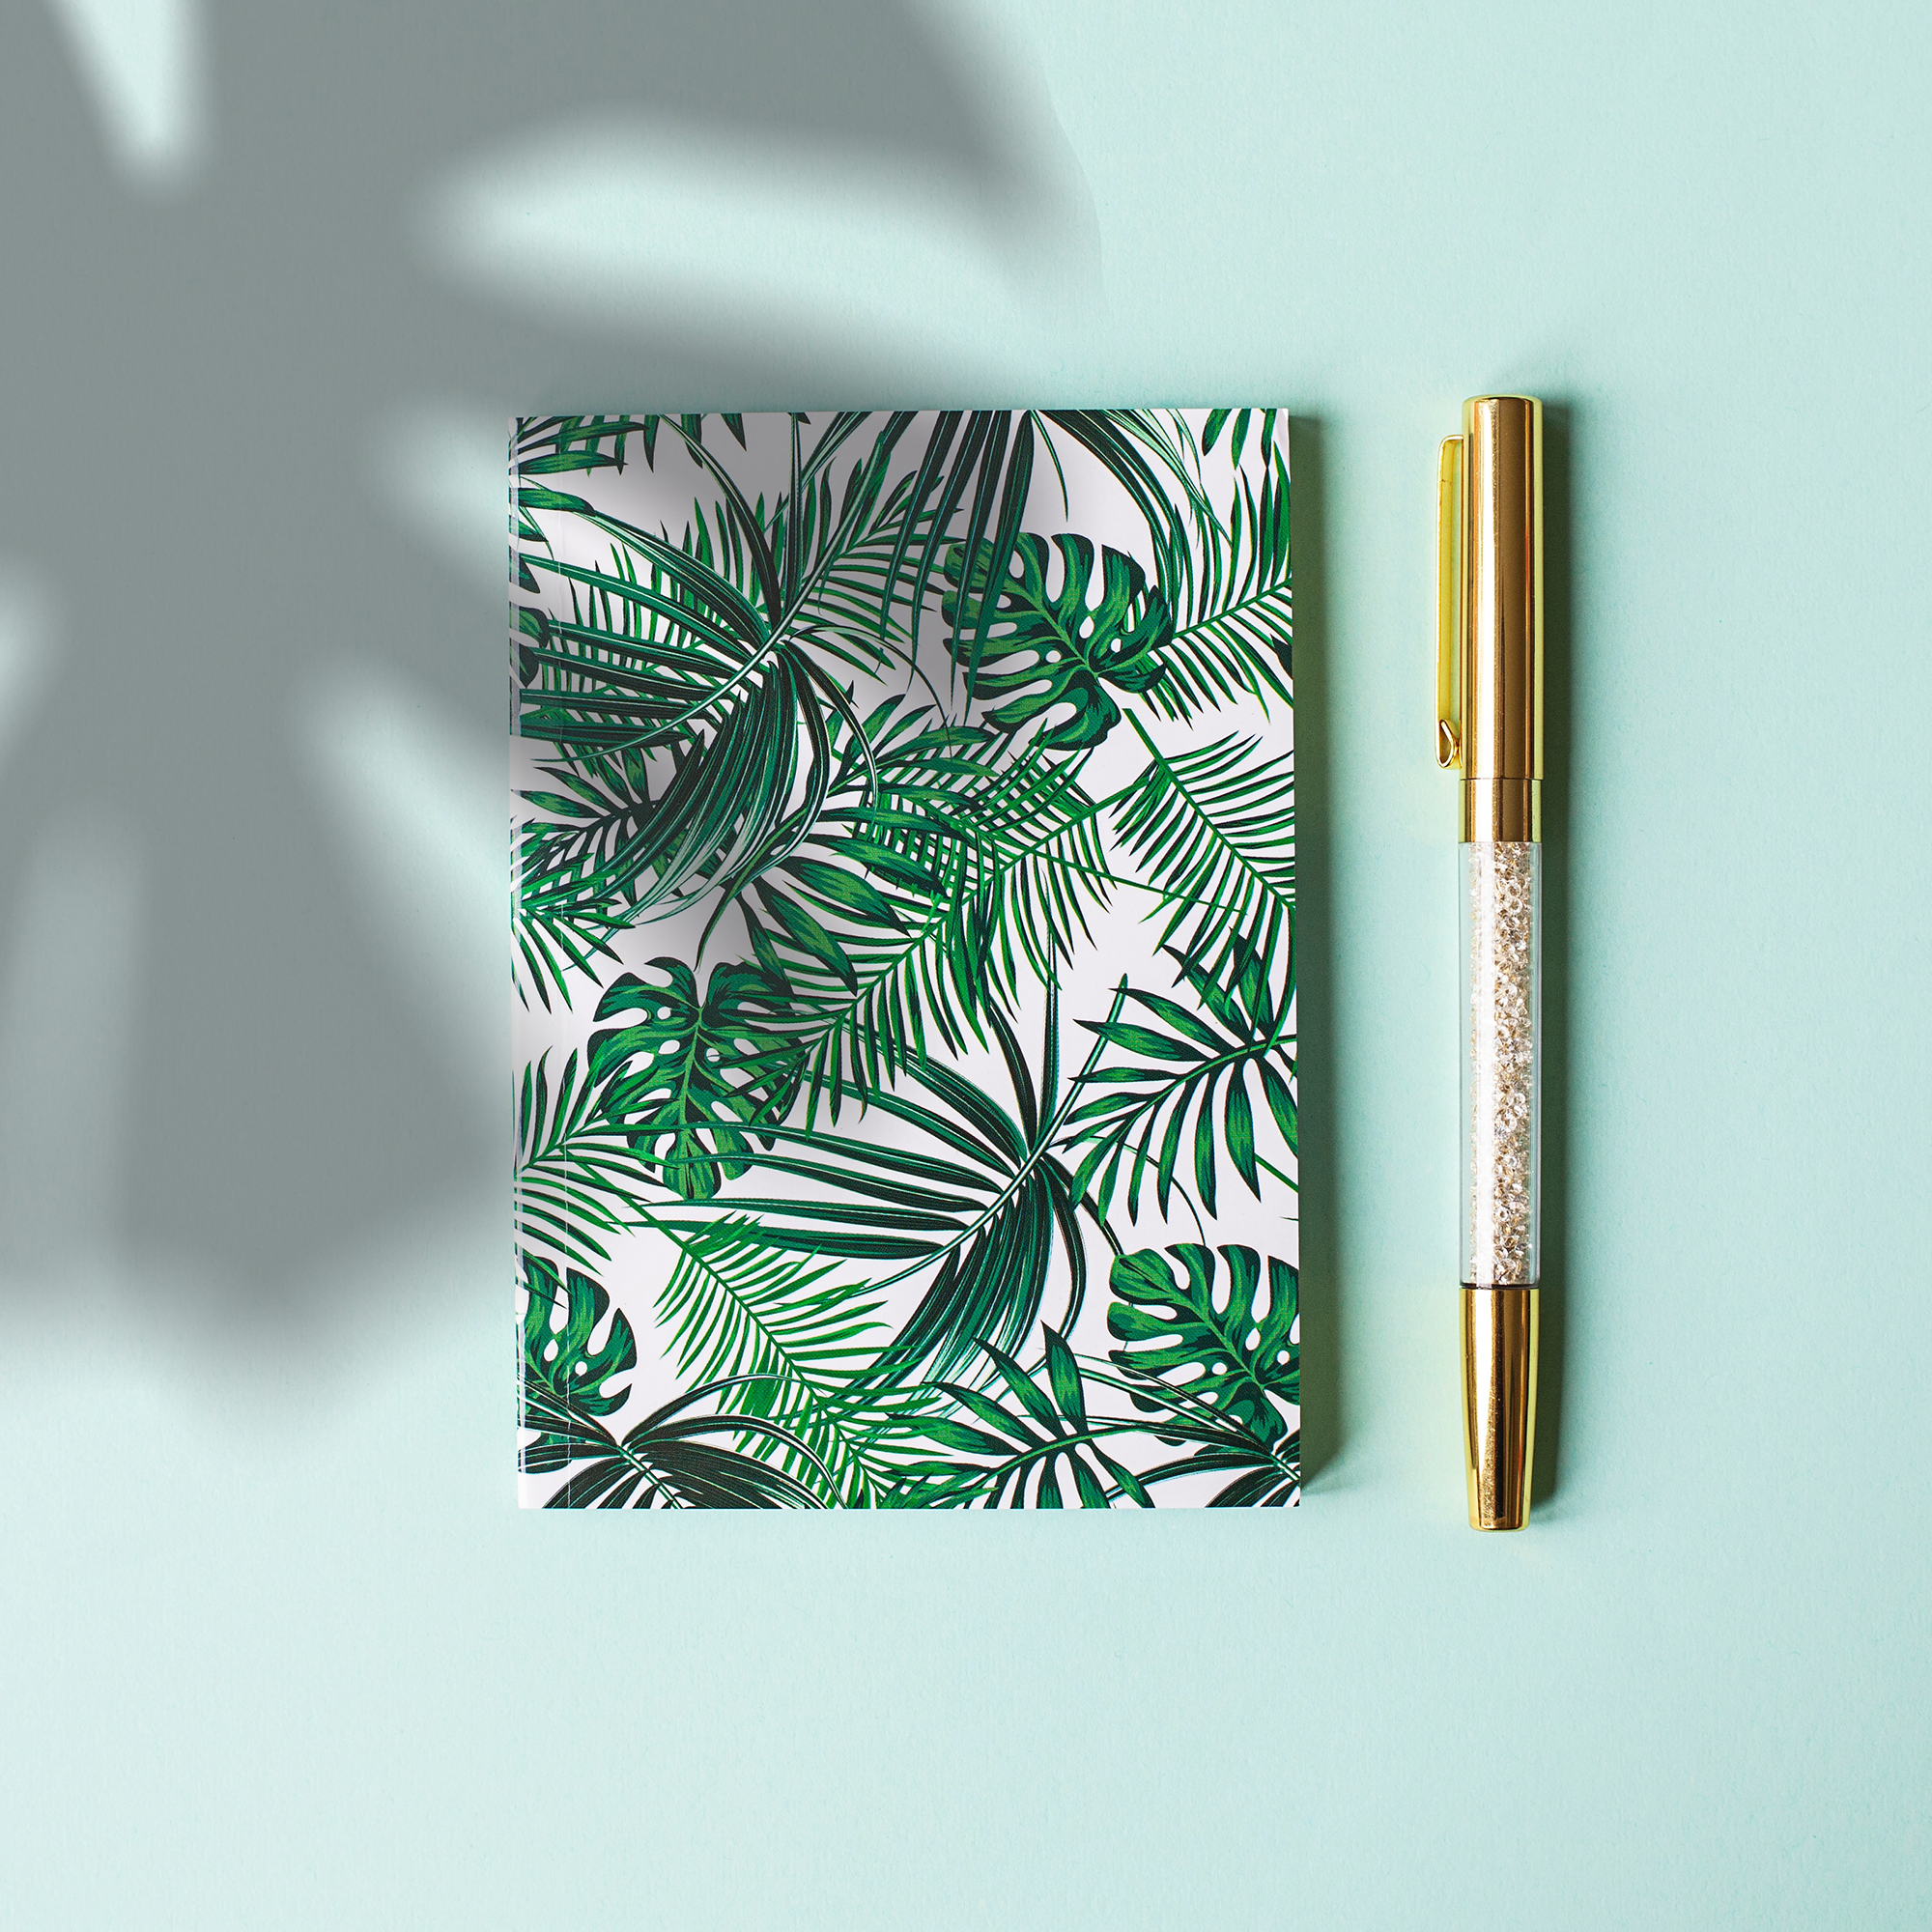 A journal with a plant pattern